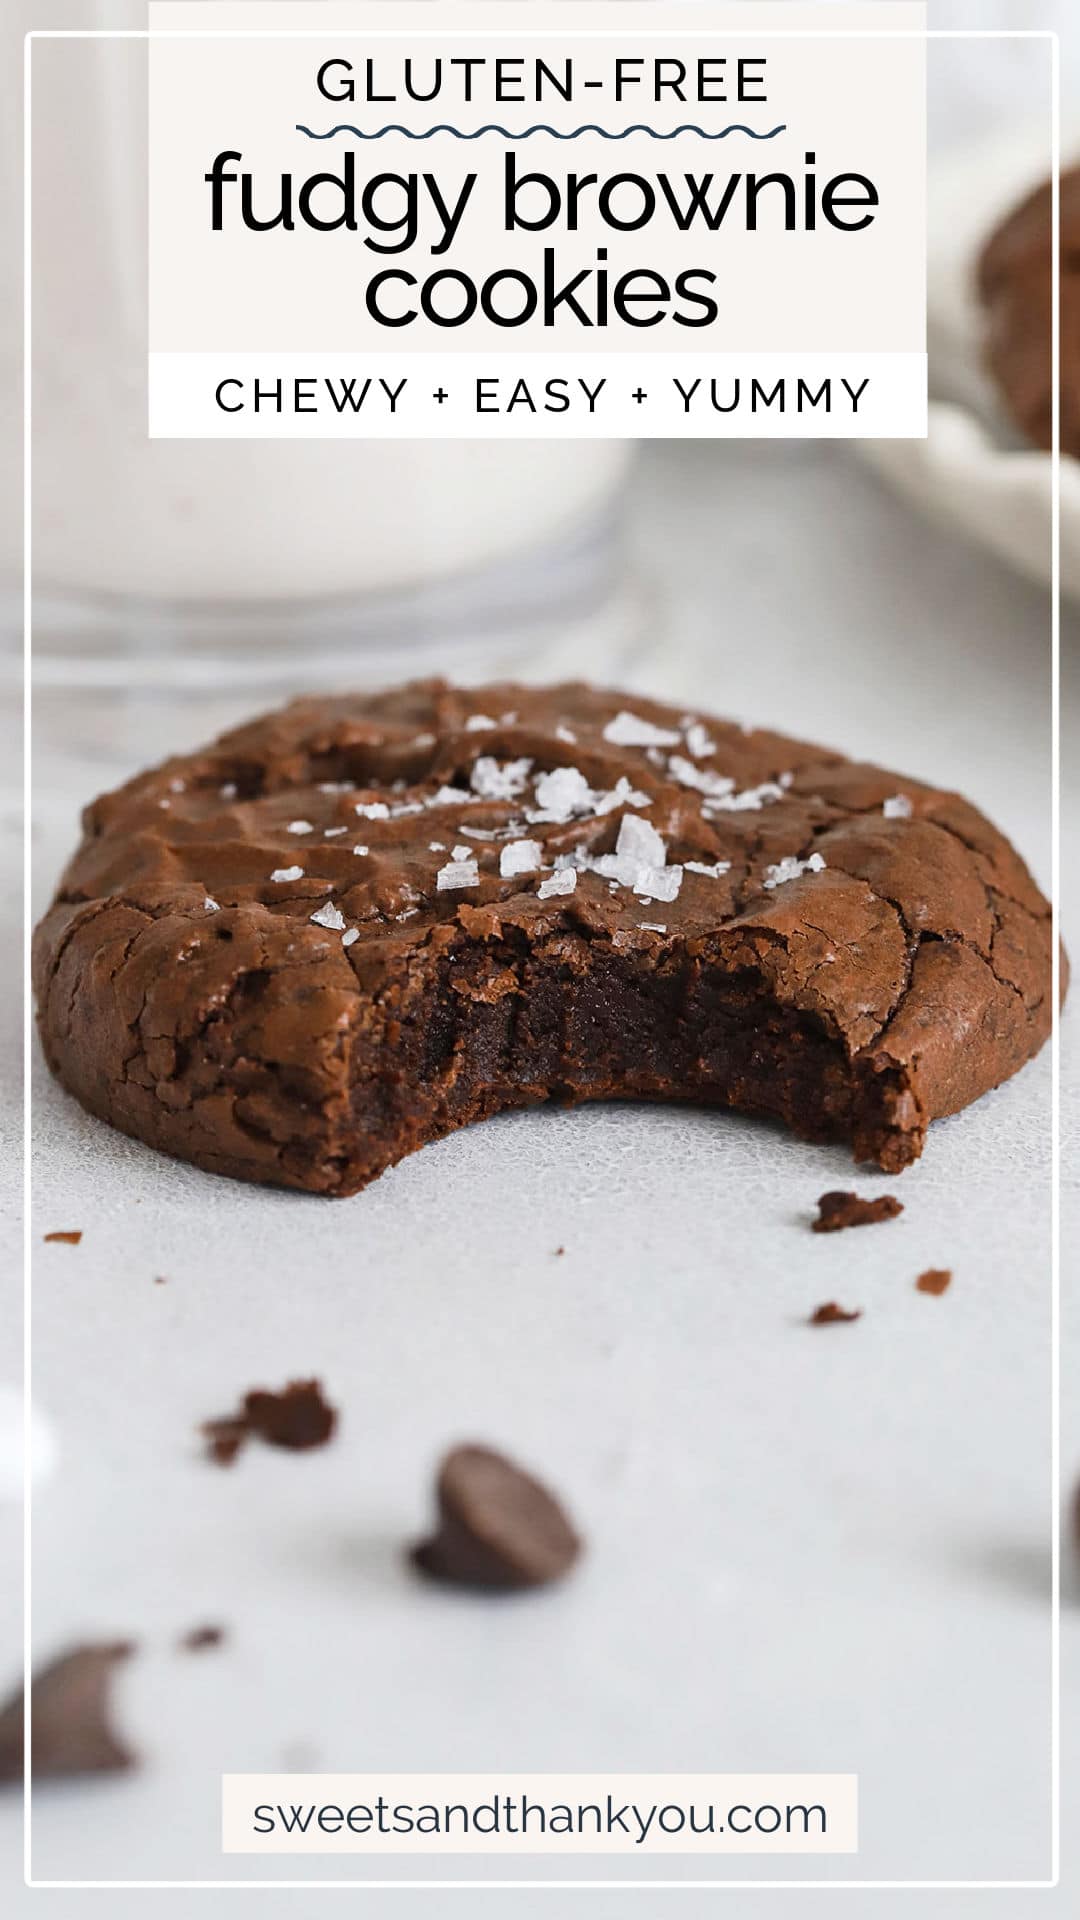 Gluten-Free Brownie Cookies - These fudgy chocolate brownie cookies are magically gluten-free, taste amazing & come together in minutes! // Gluten-free Chocolate Brownie Cookies // Gluten-Free Fudgy Brownie Cookies // Gluten-Free Brookies // Gluten-Free Brownie Cookie Recipe // gluten free cookies // easy gluten-free chocolate cookies // fudgy chocolate cookies // gluten-free brownie cookie // ice cream sandwich cookies